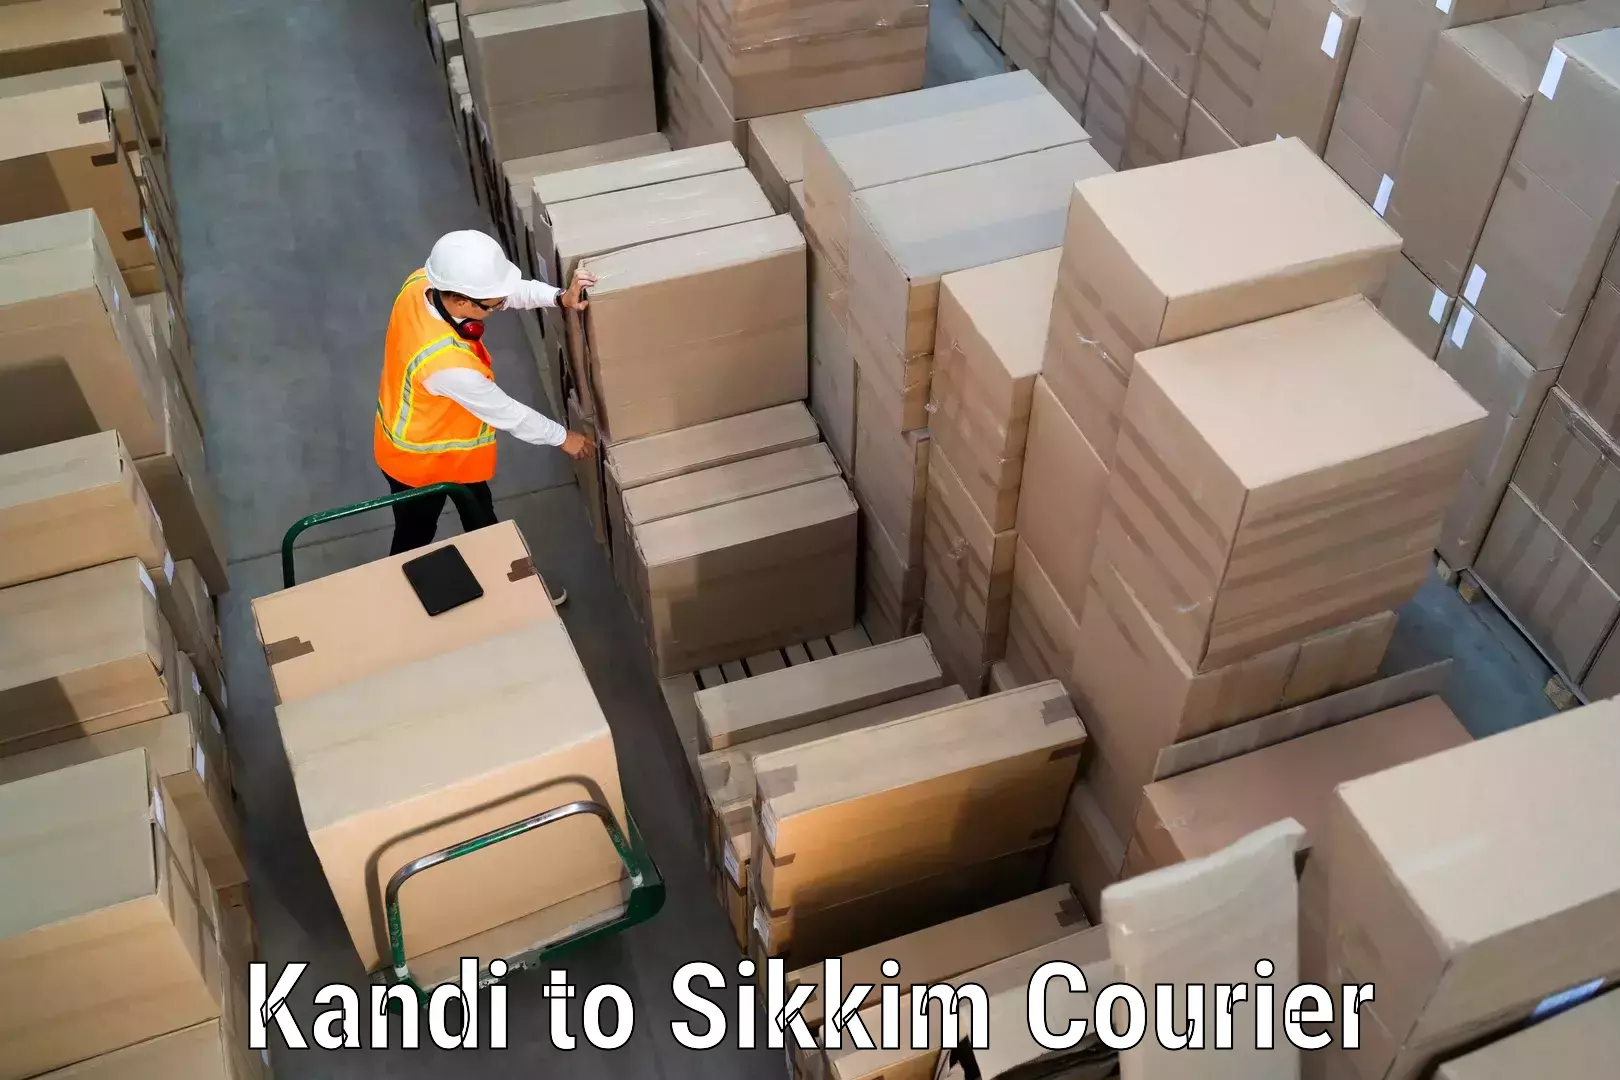 Express delivery network Kandi to West Sikkim